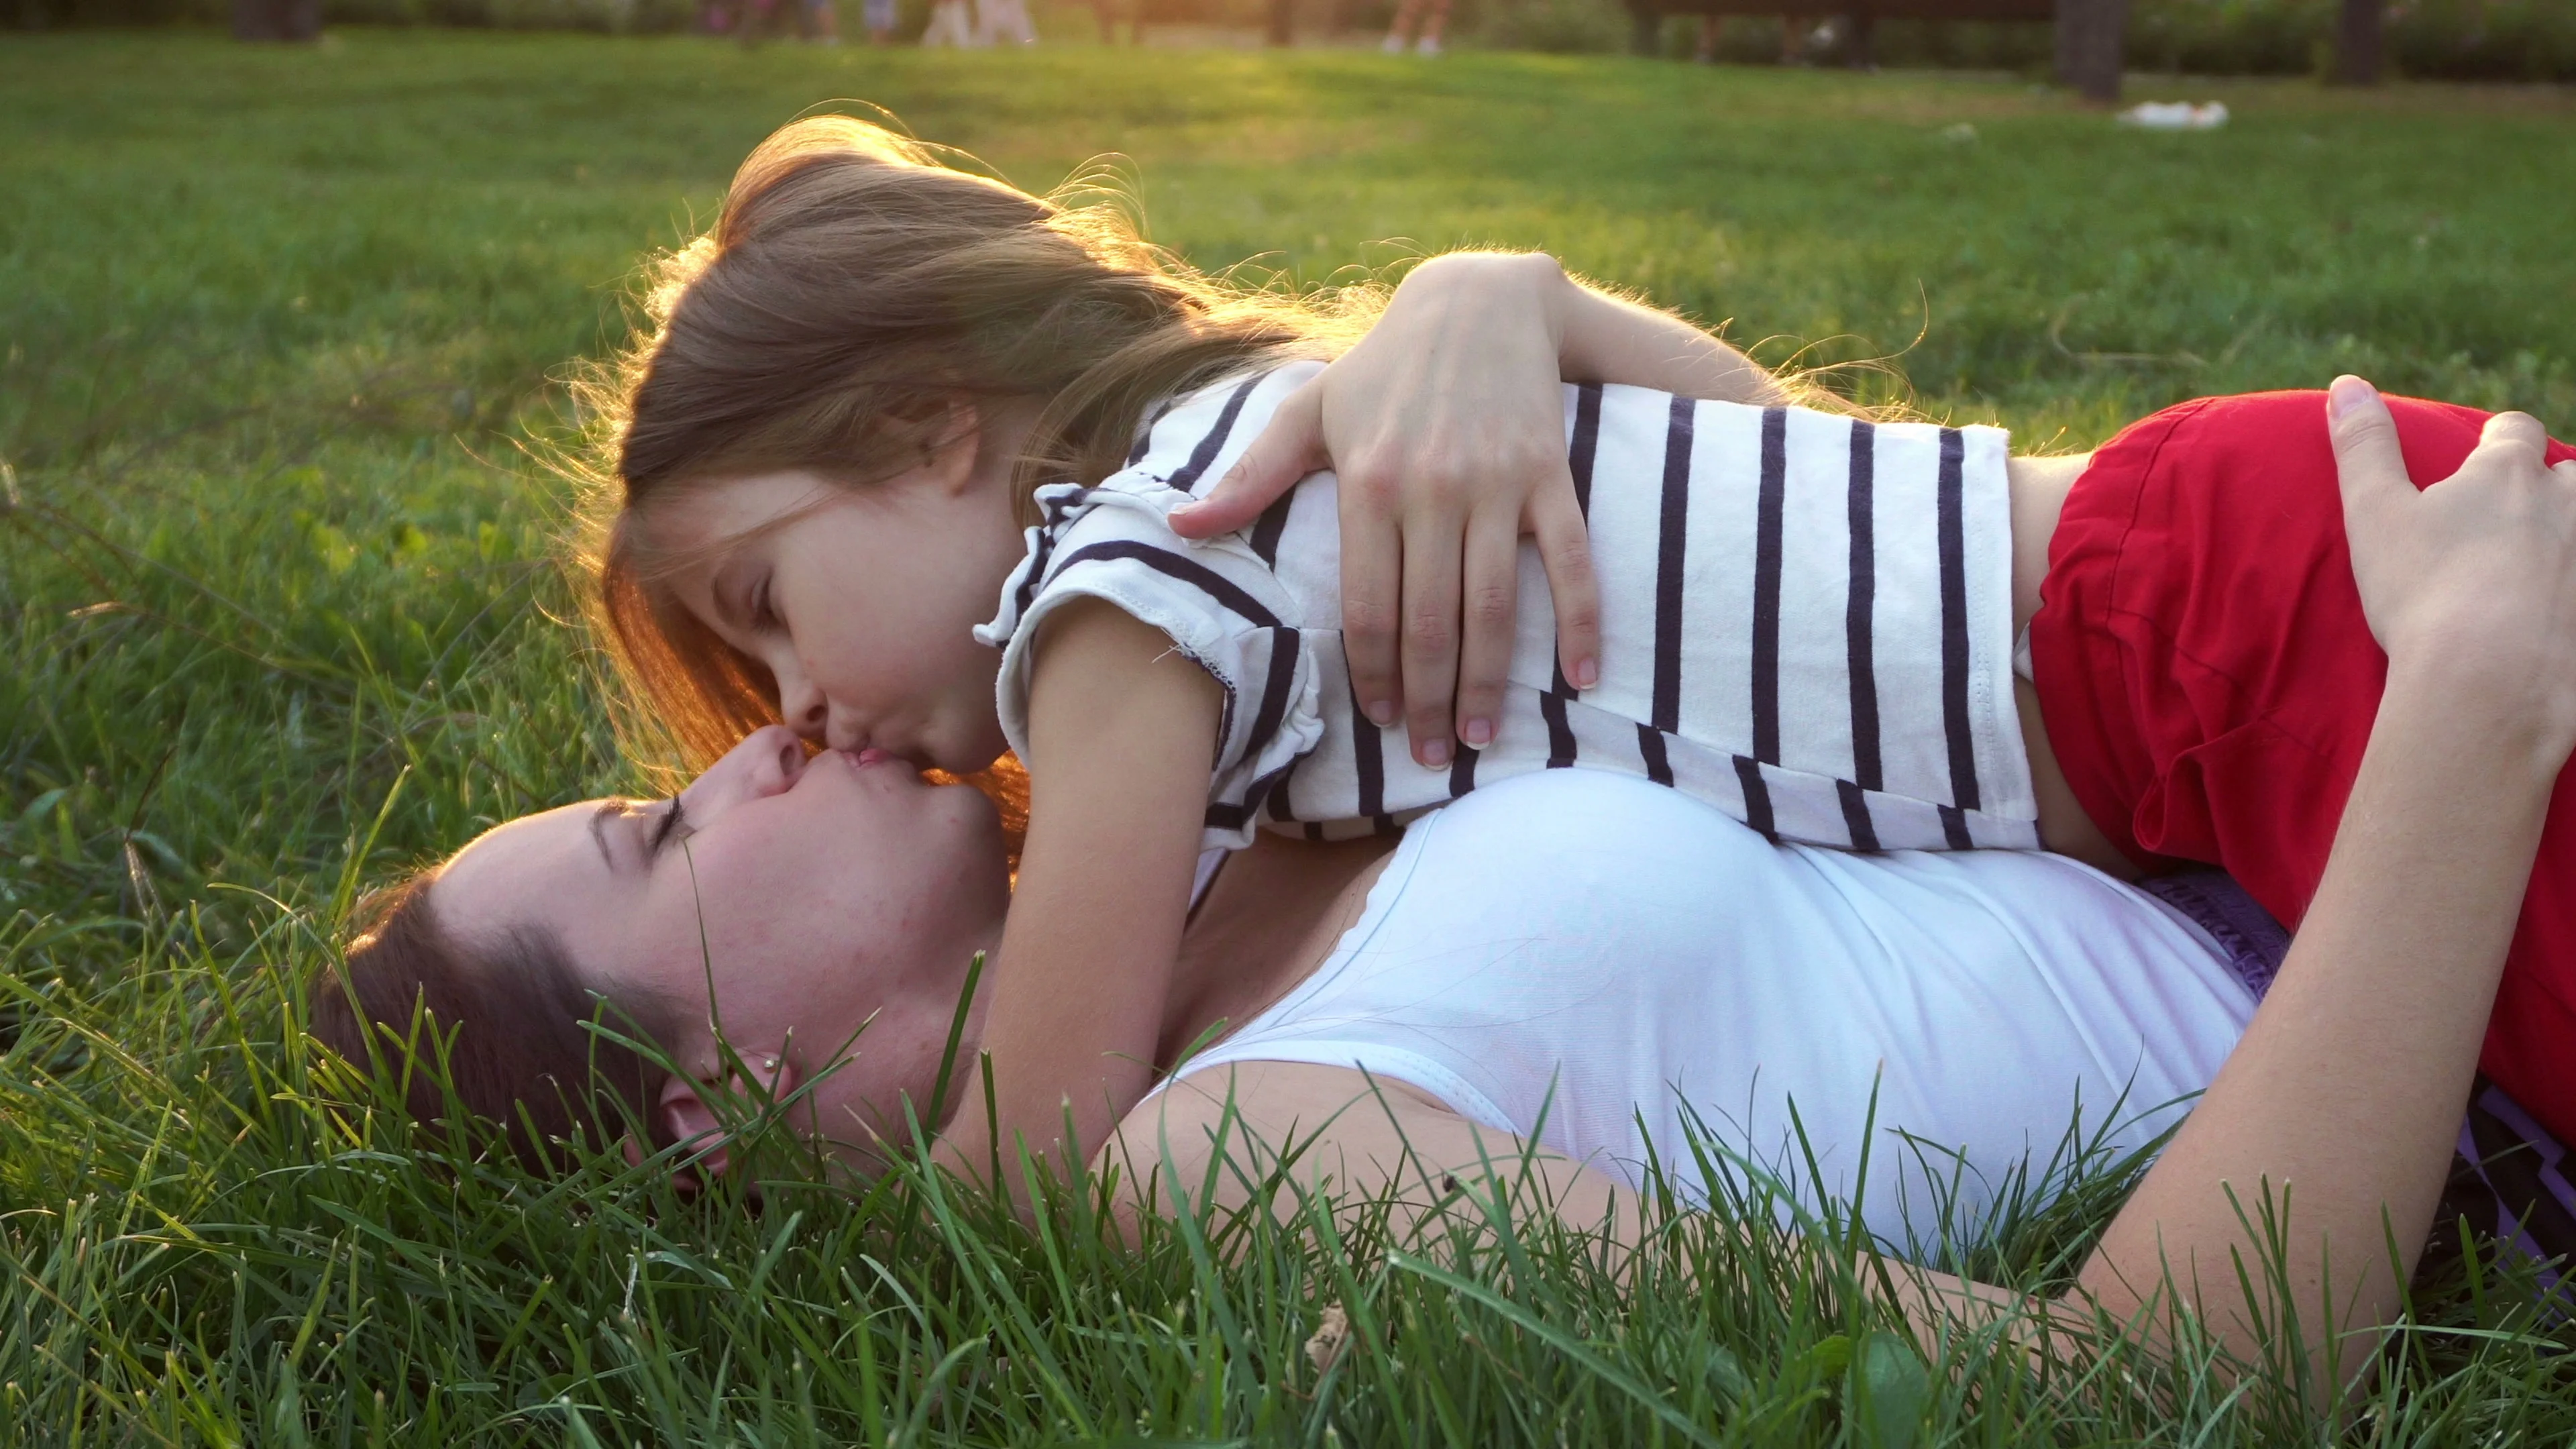 bob strasser recommends Mother Daughter Kissing Videos